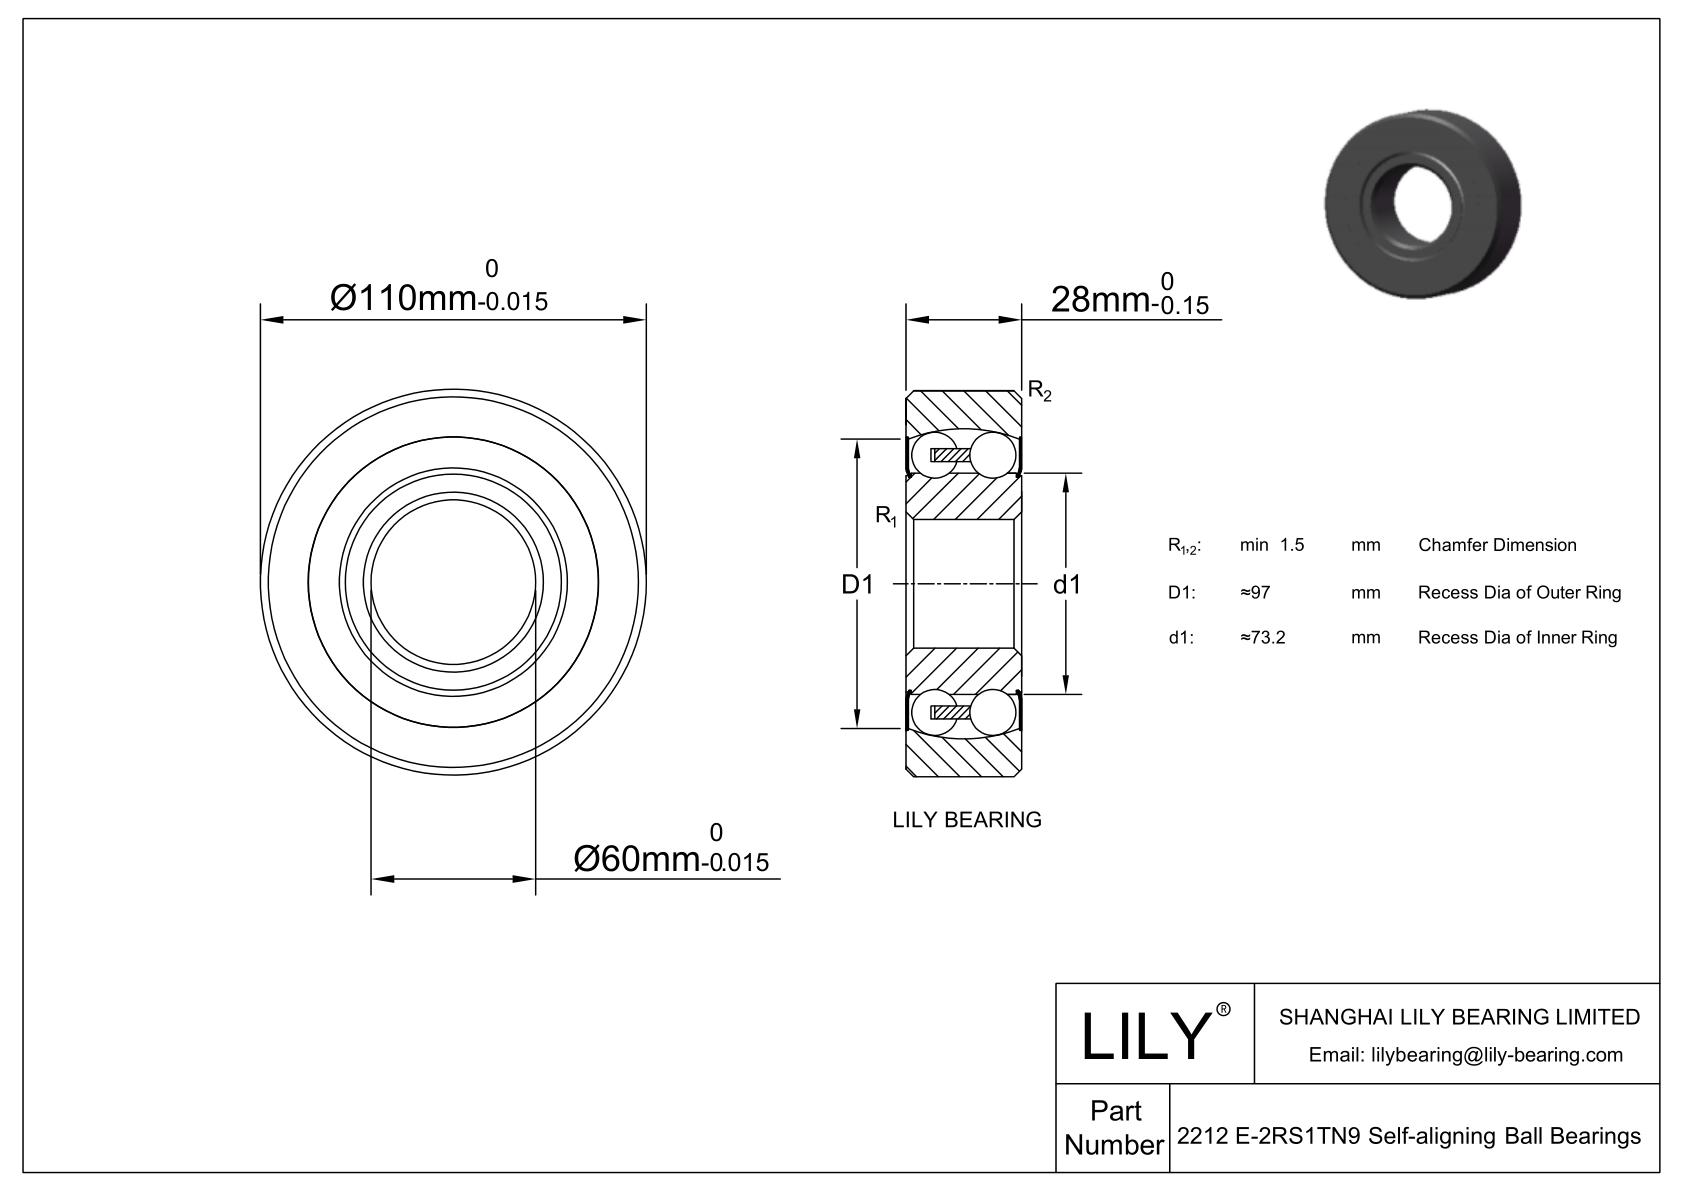 CE2212 E-SCPP Silicon Carbide Self Aligning Ball Bearings cad drawing